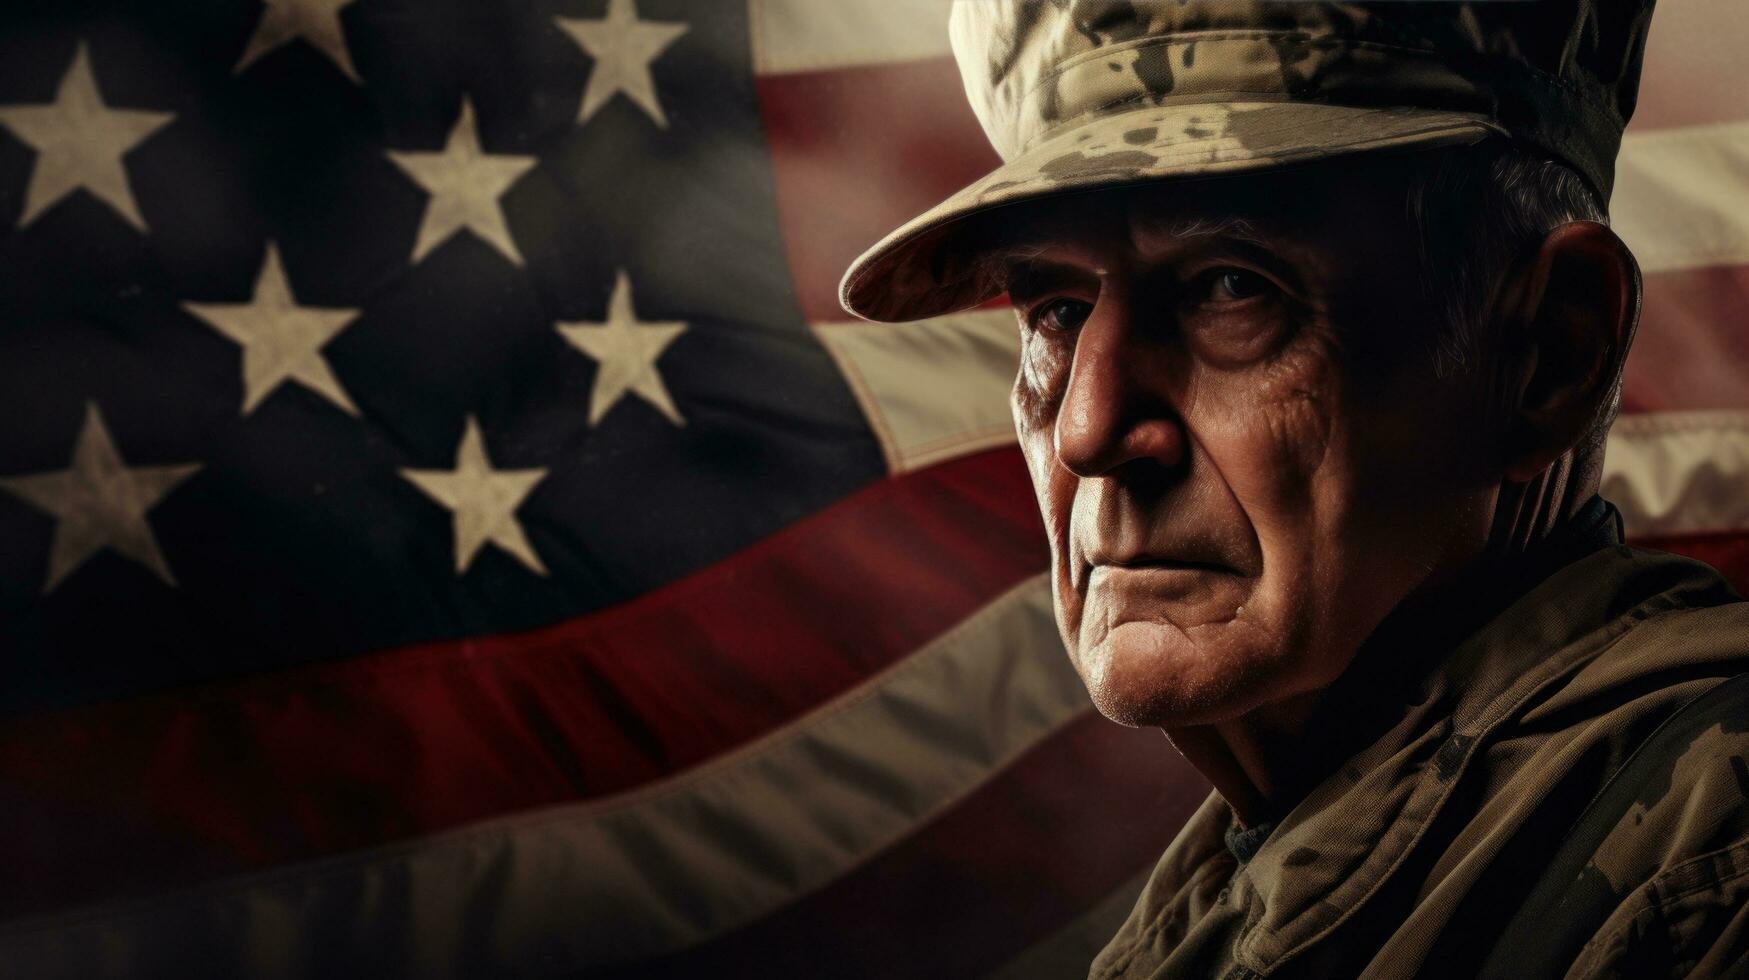 An elderly male soldier in military uniform standing in front of an american flag photo